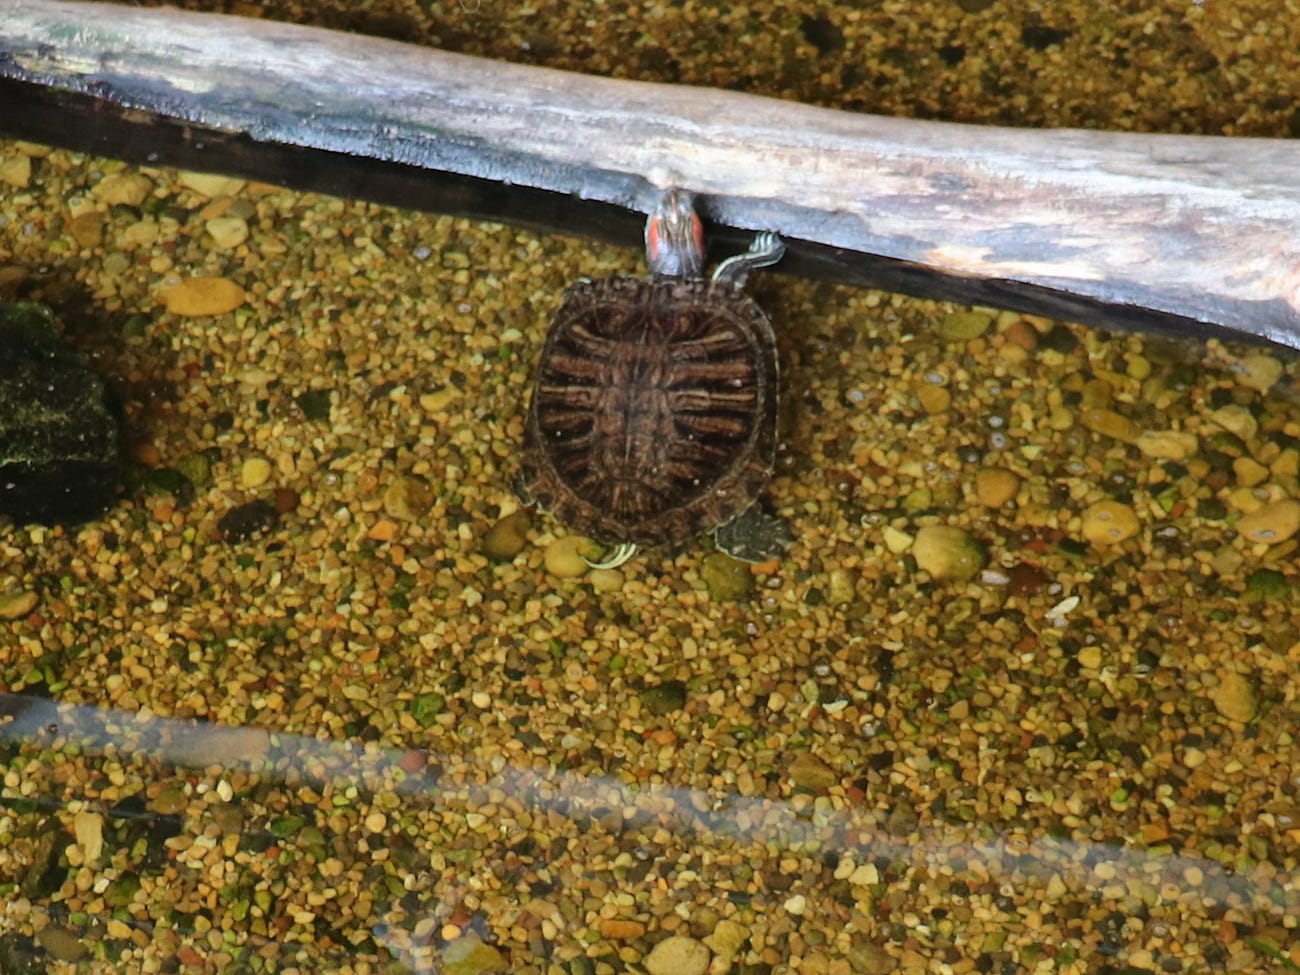 turtle in clear shallow water with pebbles along the bottom